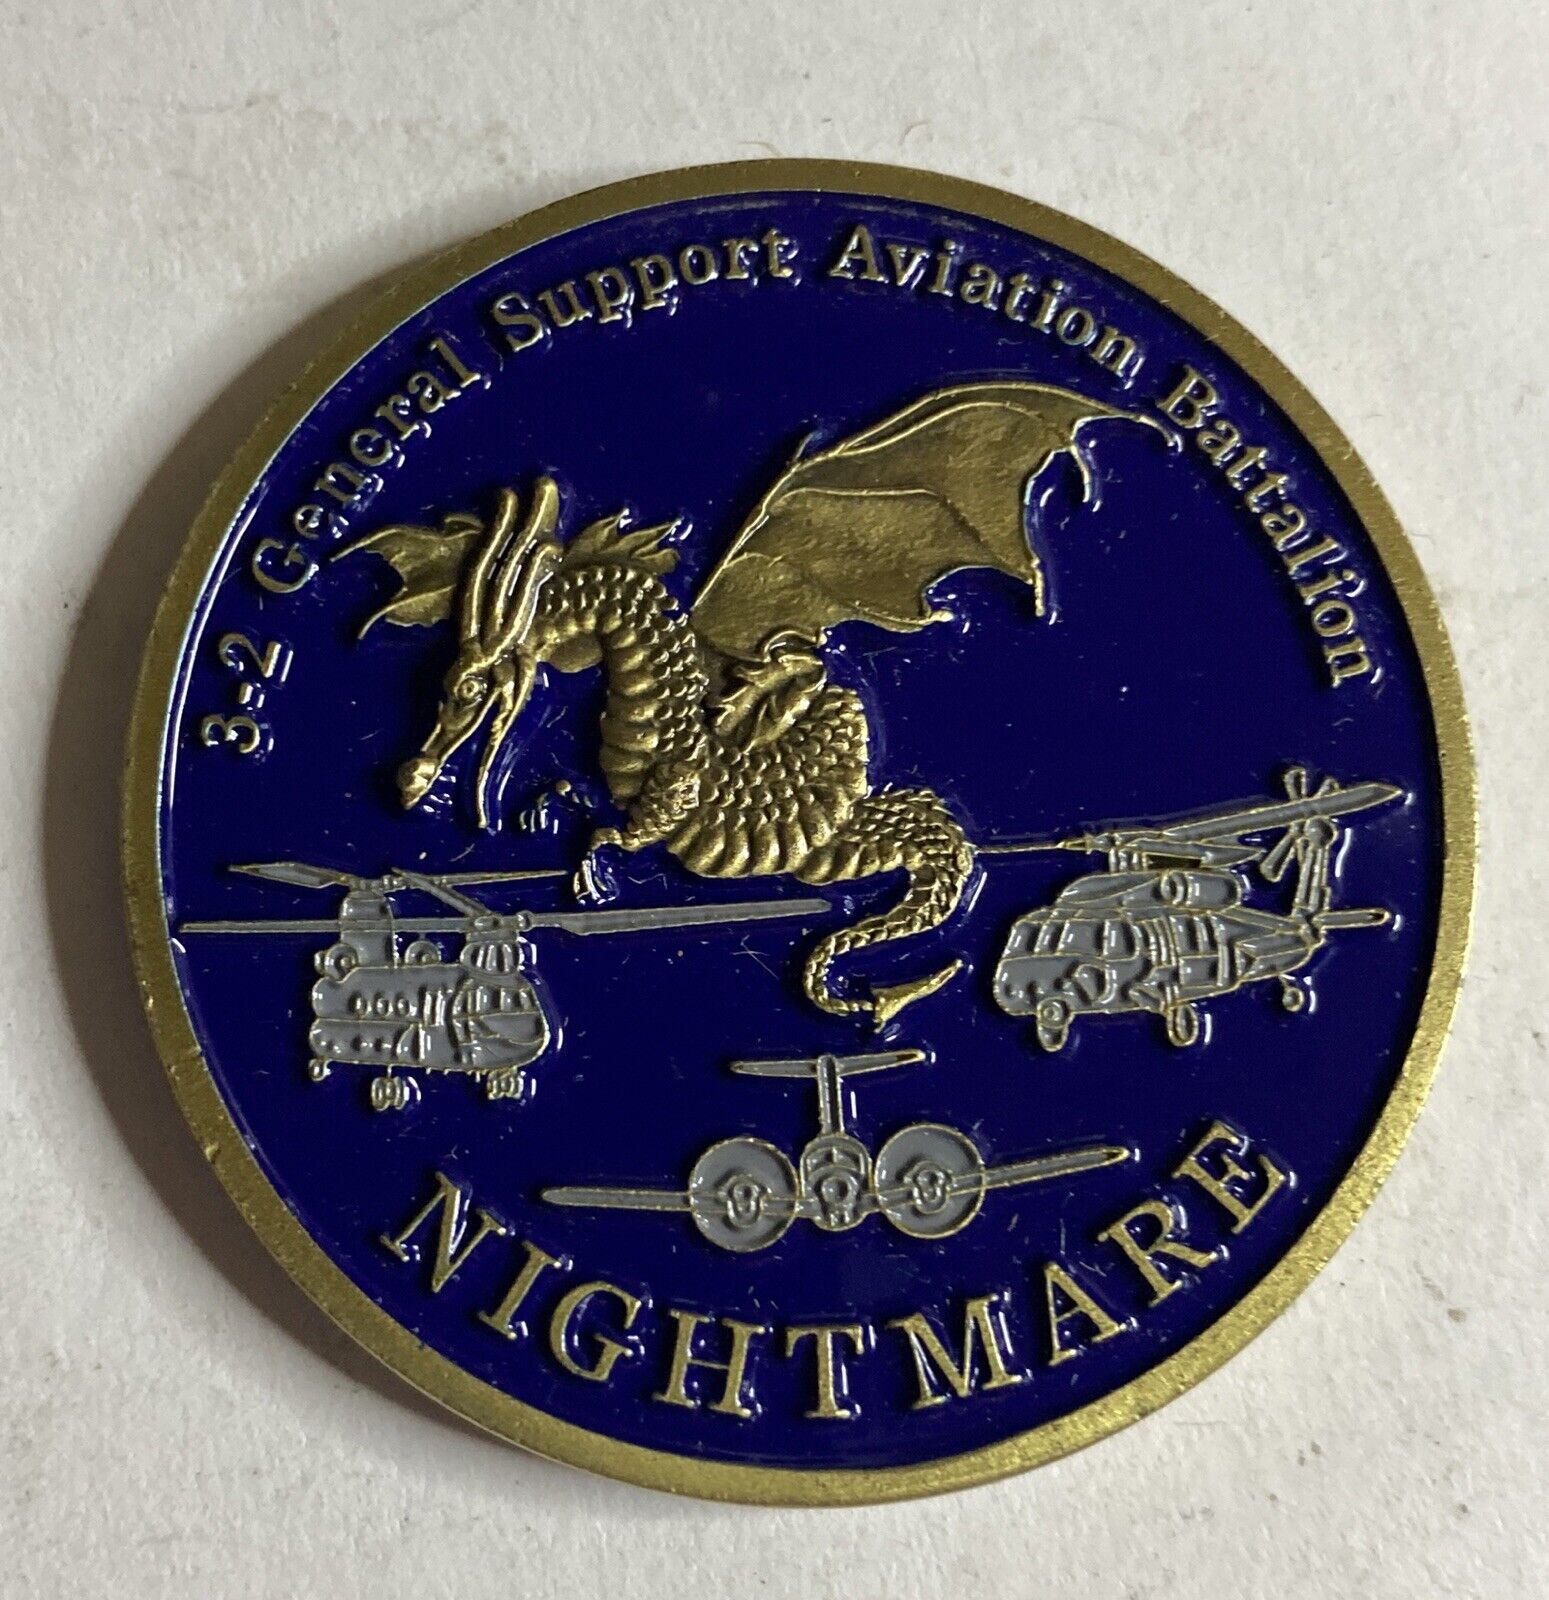 3-2 General Support Aviation Battalion Nightmare Challenge Coin RARE Some Damage